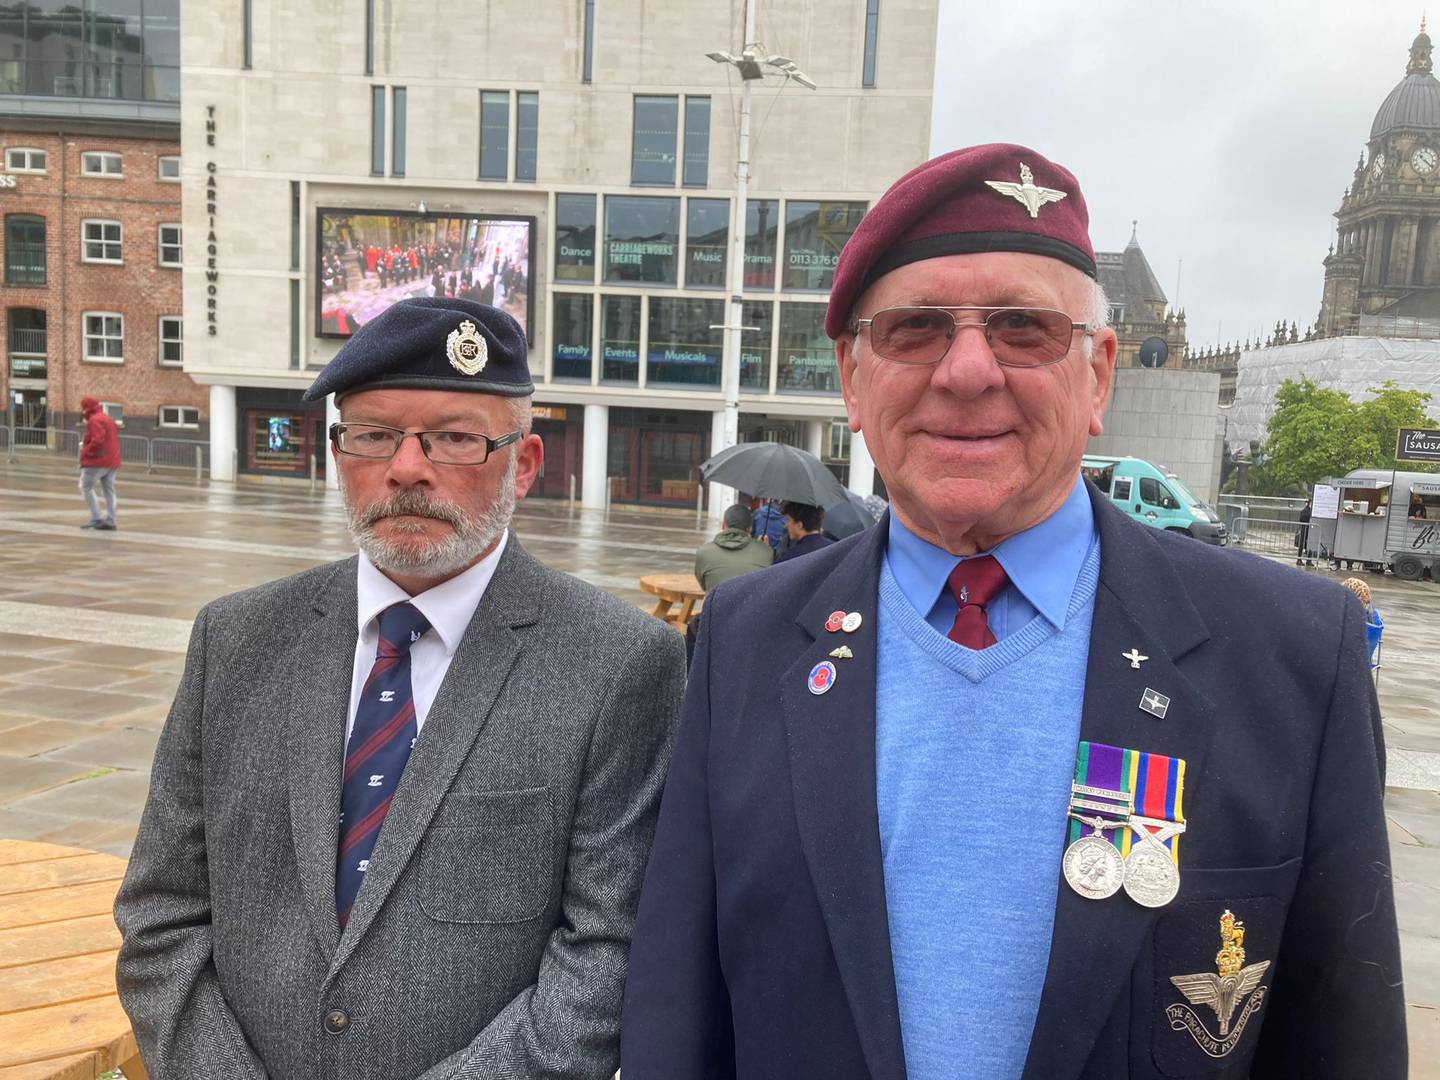 Tom Barr and Paul Bradford, 80, were in Leeds to watch a broadcast of Queen Elizabeth’s funeral. Nicky Harley / The National